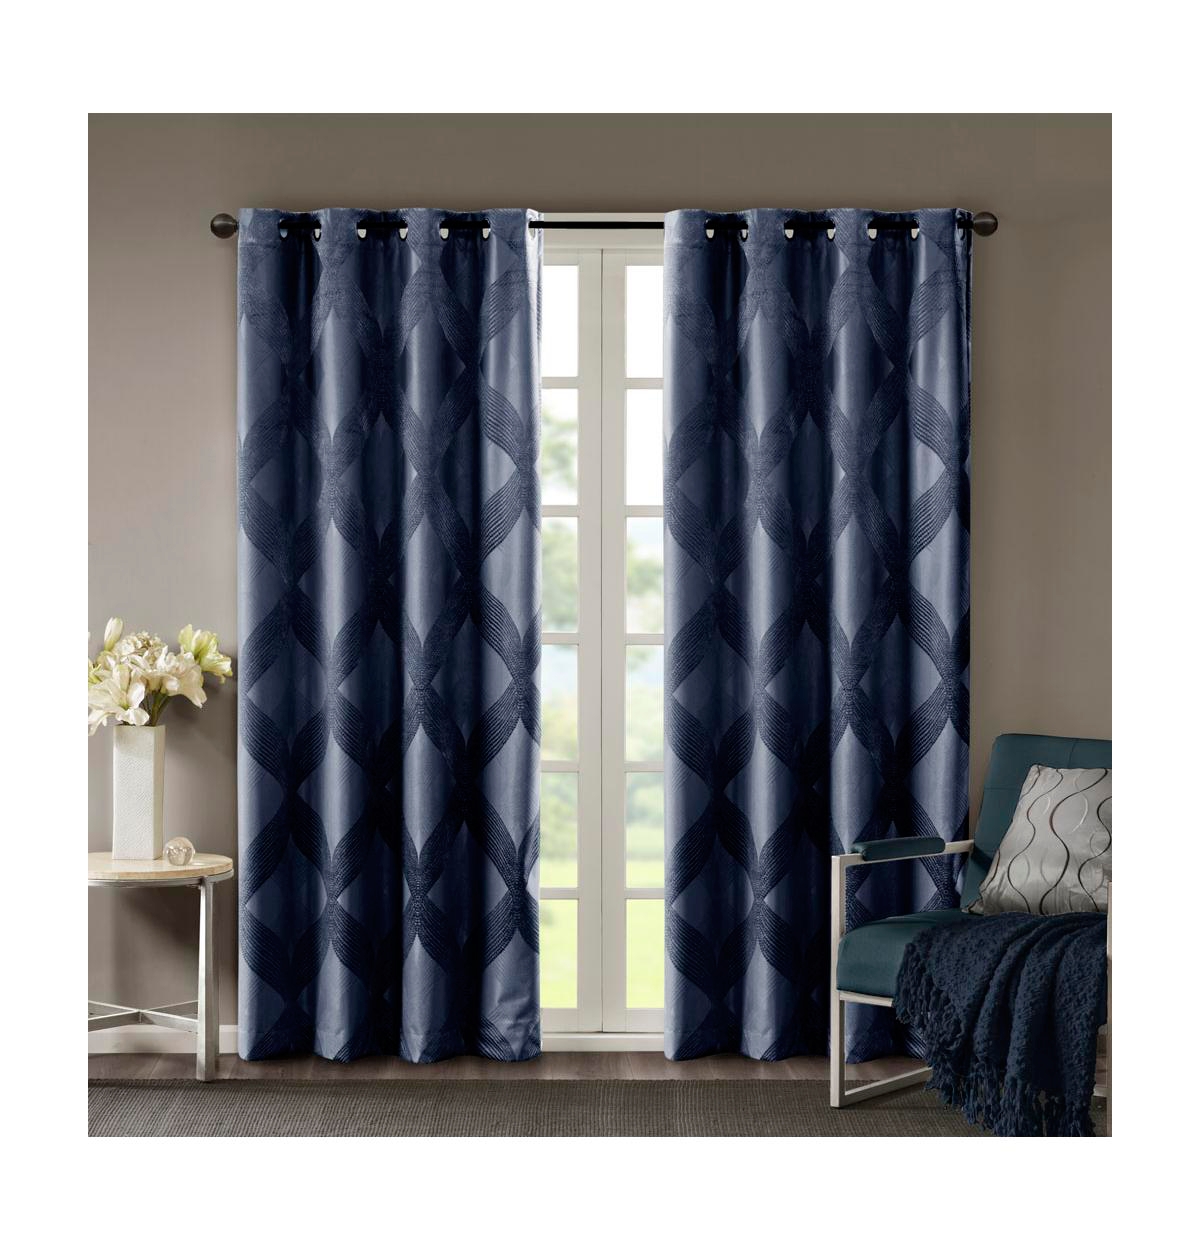 Bentley Ogee Knitted Jacquard Total Blackout Curtain Panel, 50"W x 84"L - Navy